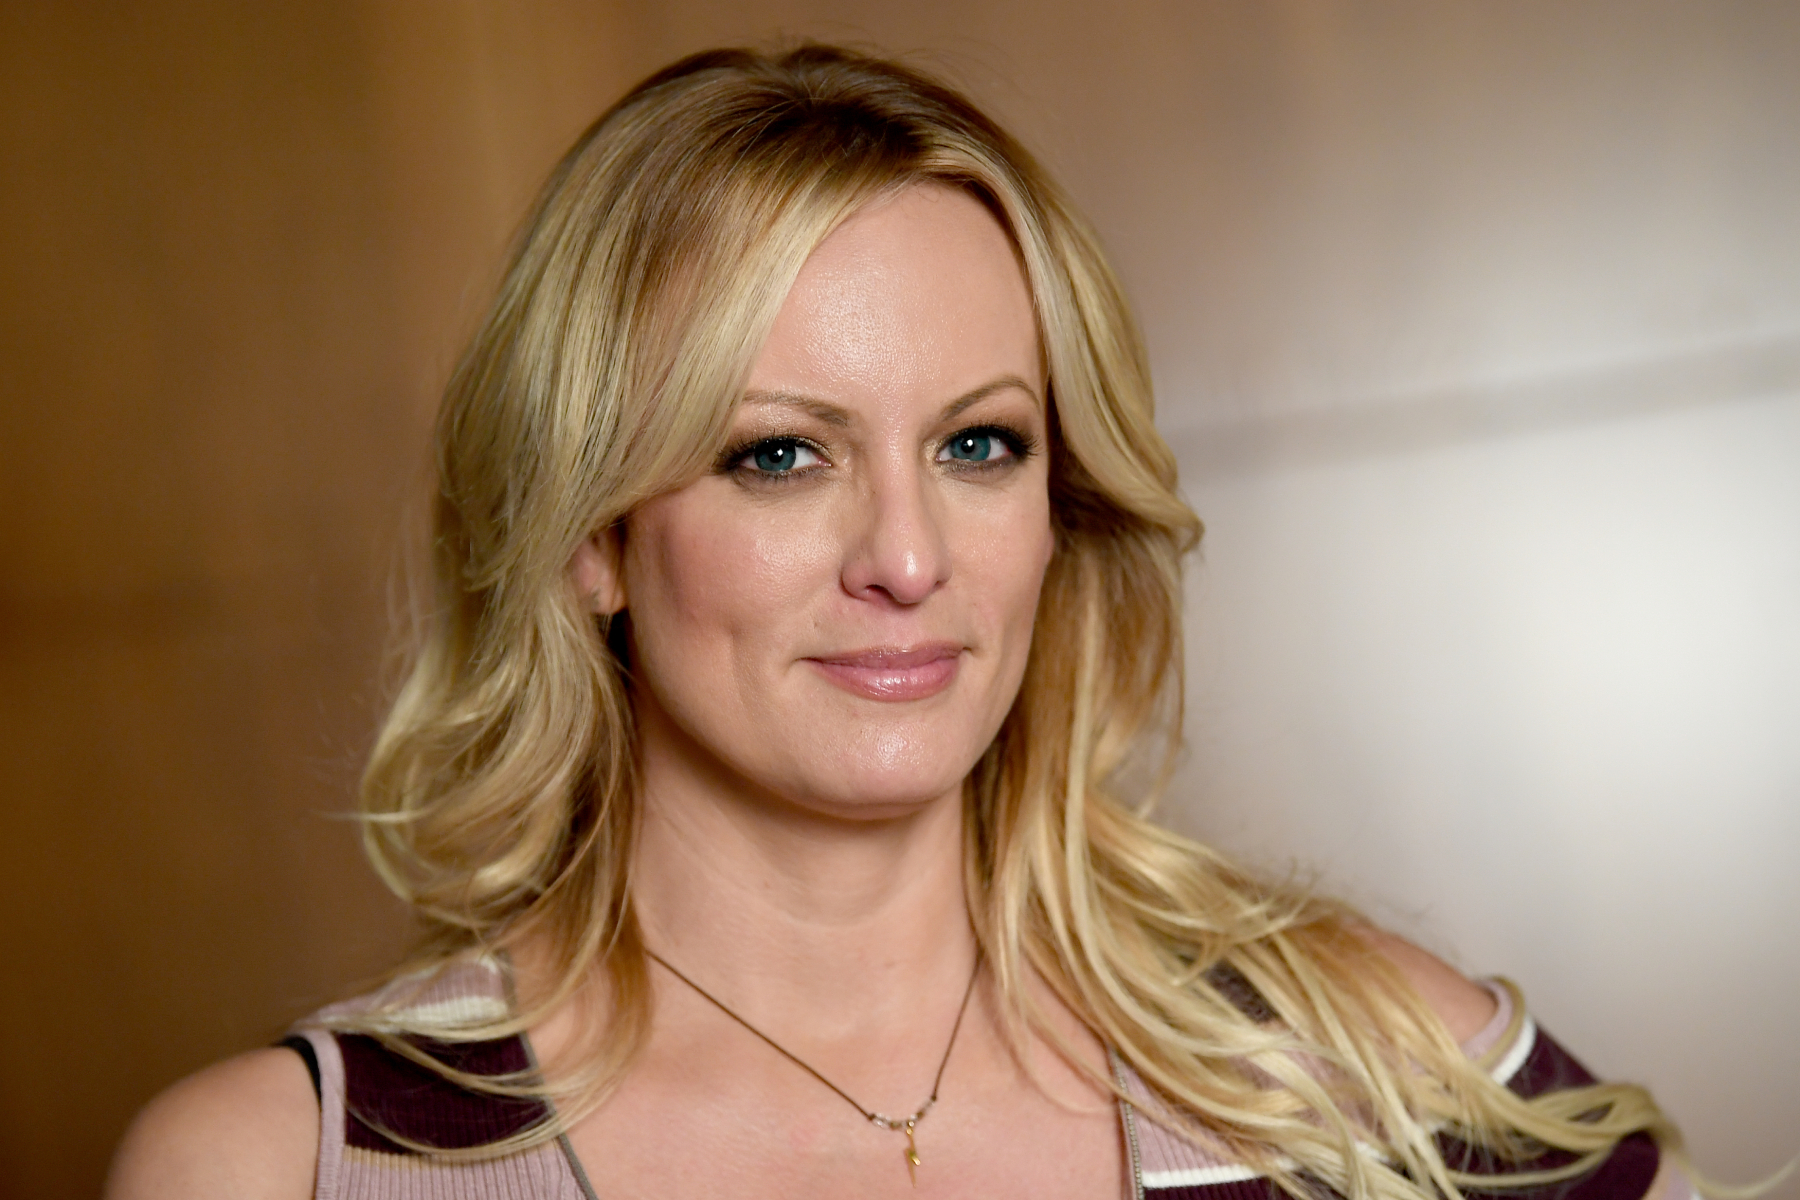 amir mark recommends stormy daniels in action pic